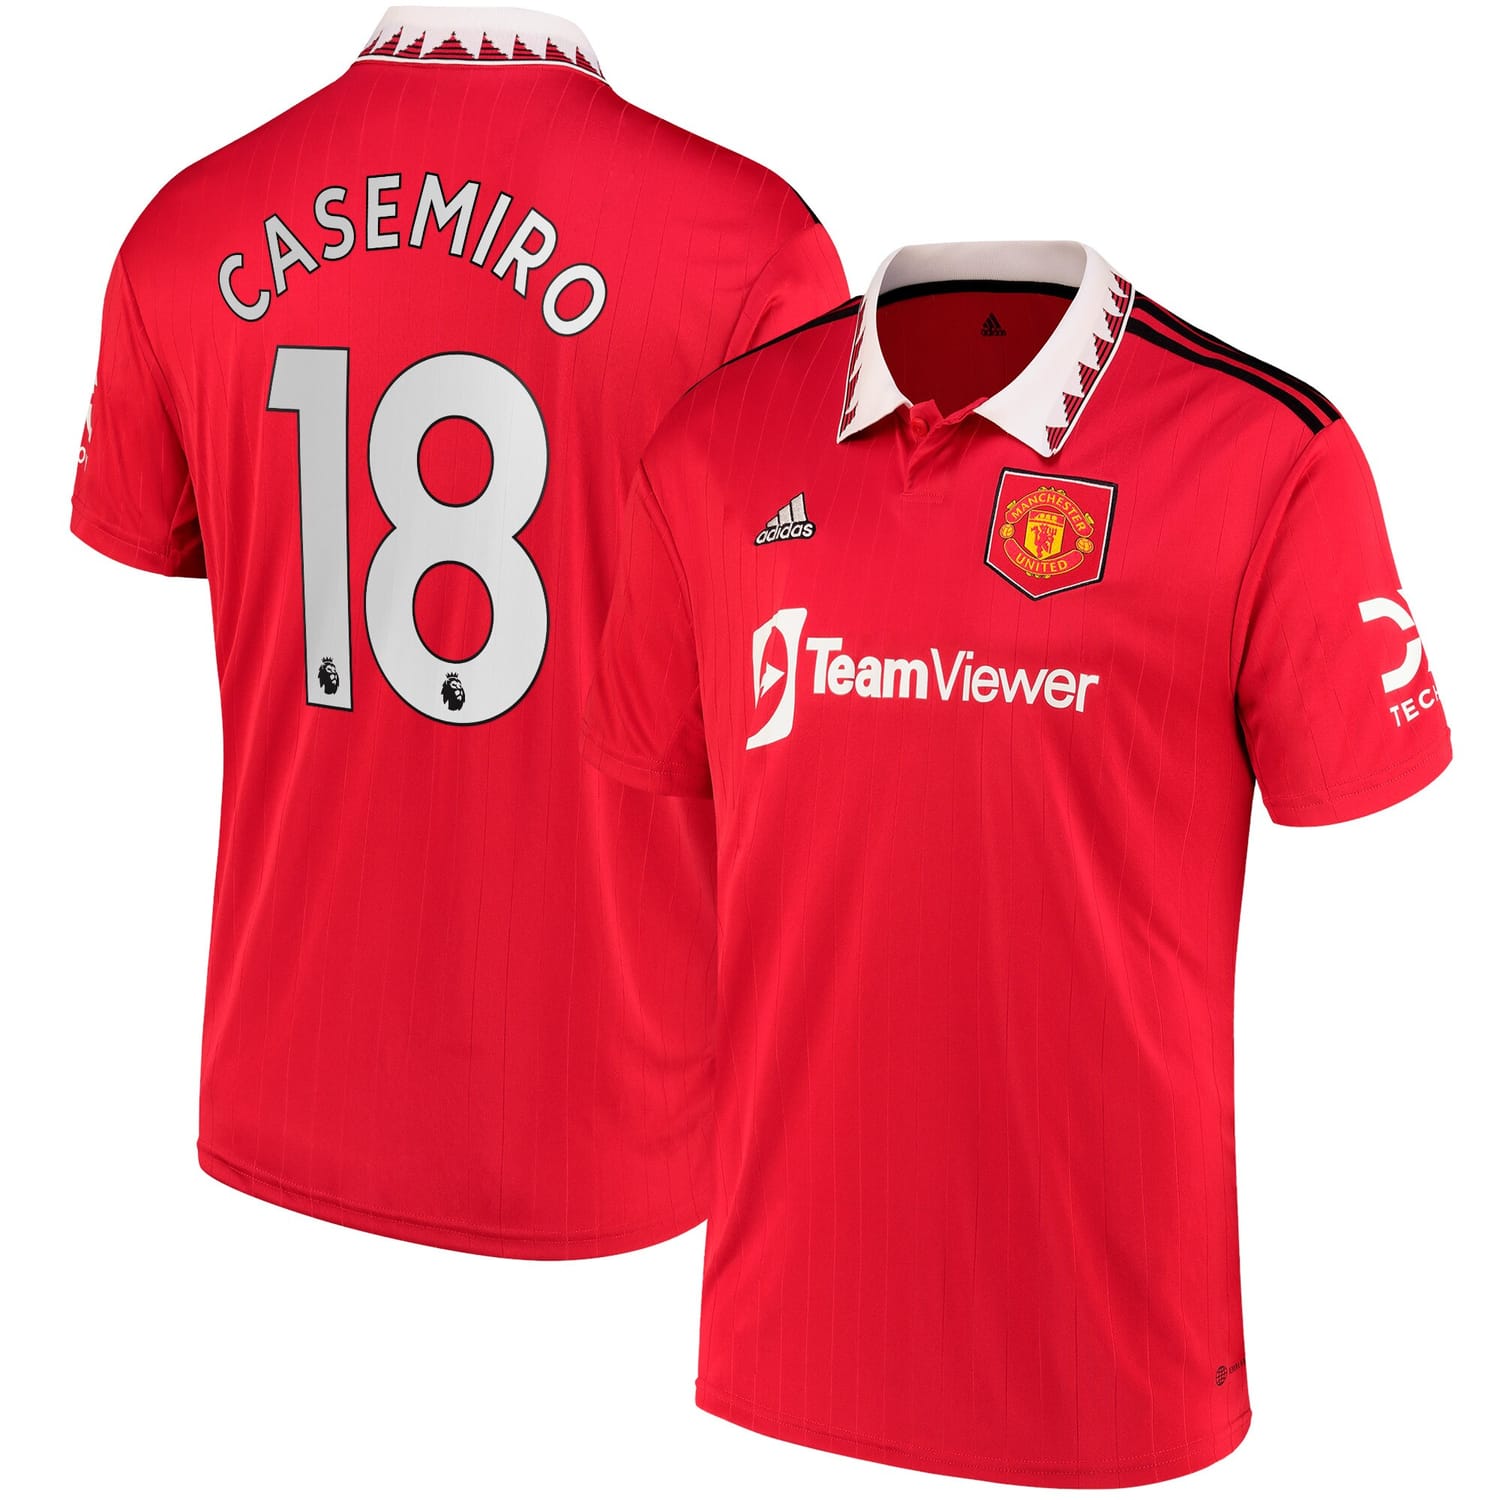 Premier League Manchester United Home Jersey Shirt 2022-23 player Casemiro 18 printing for Men